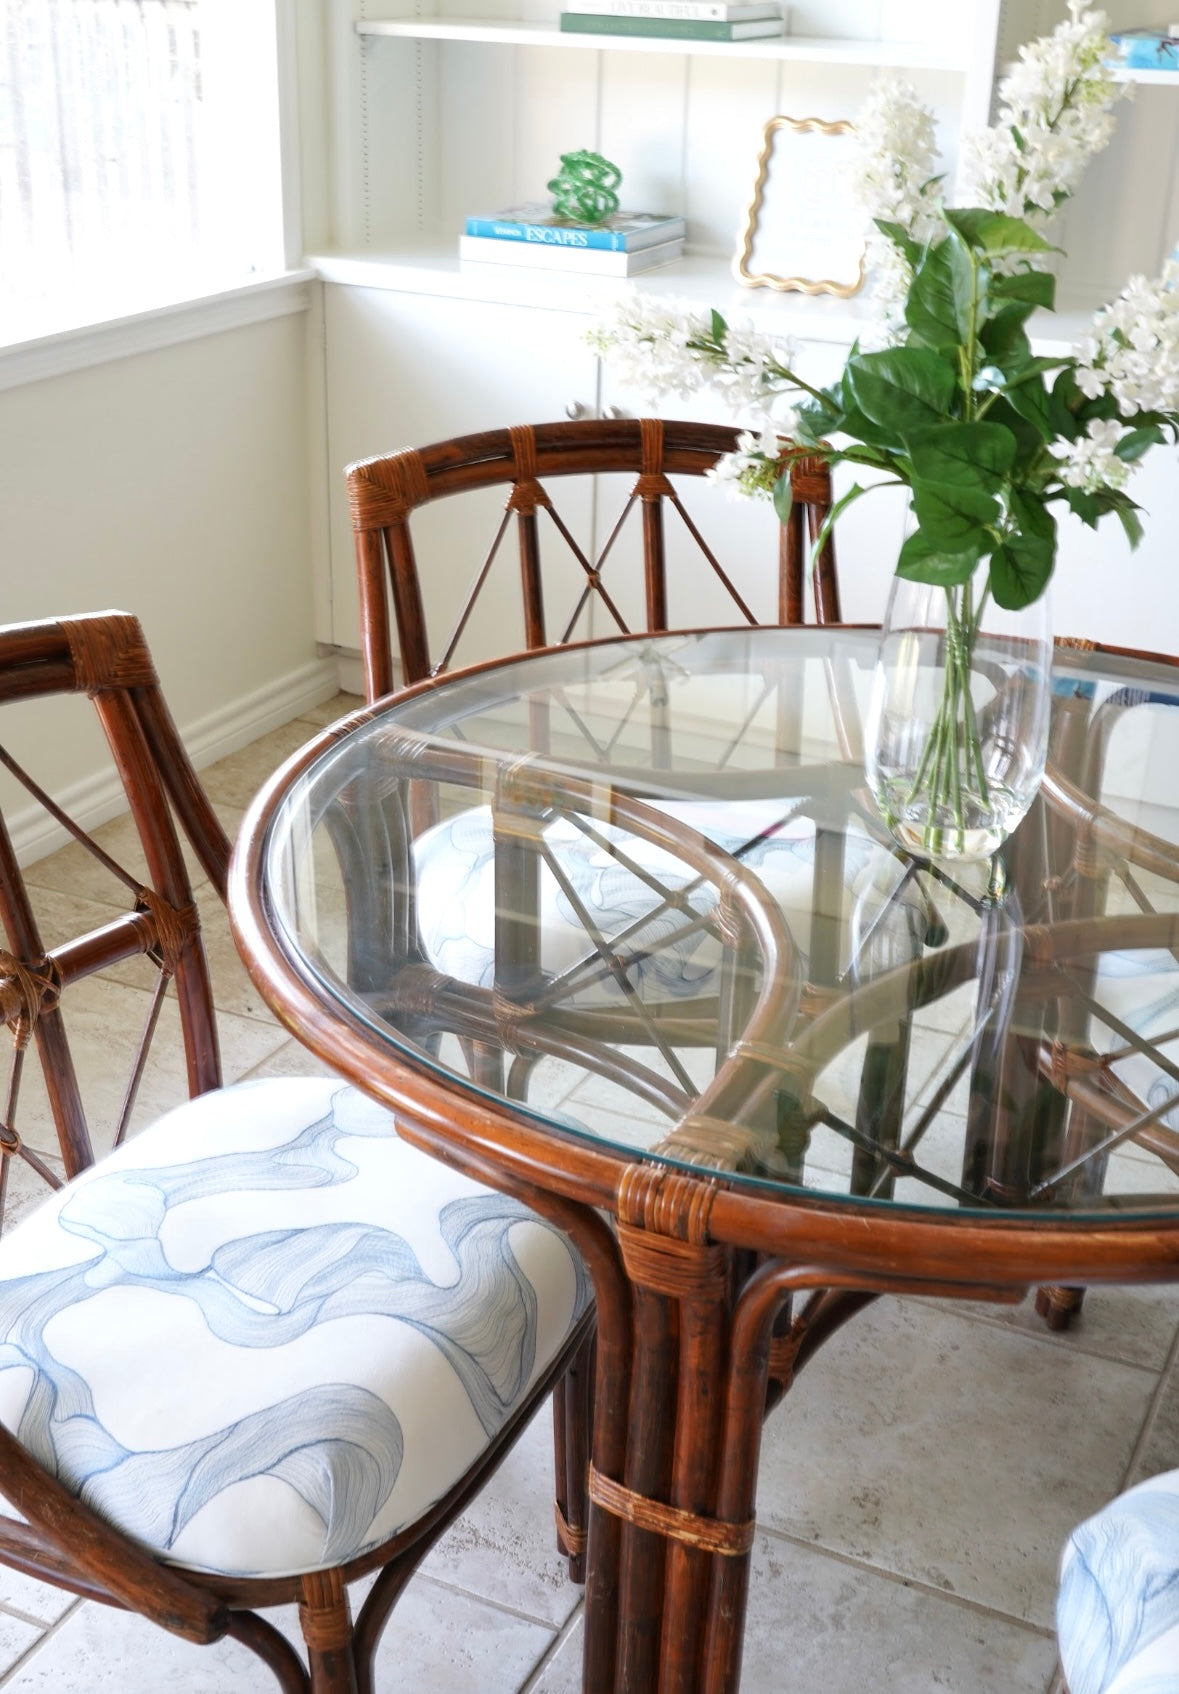 ROUND BAMBOO TABLE WITH CHAIRS